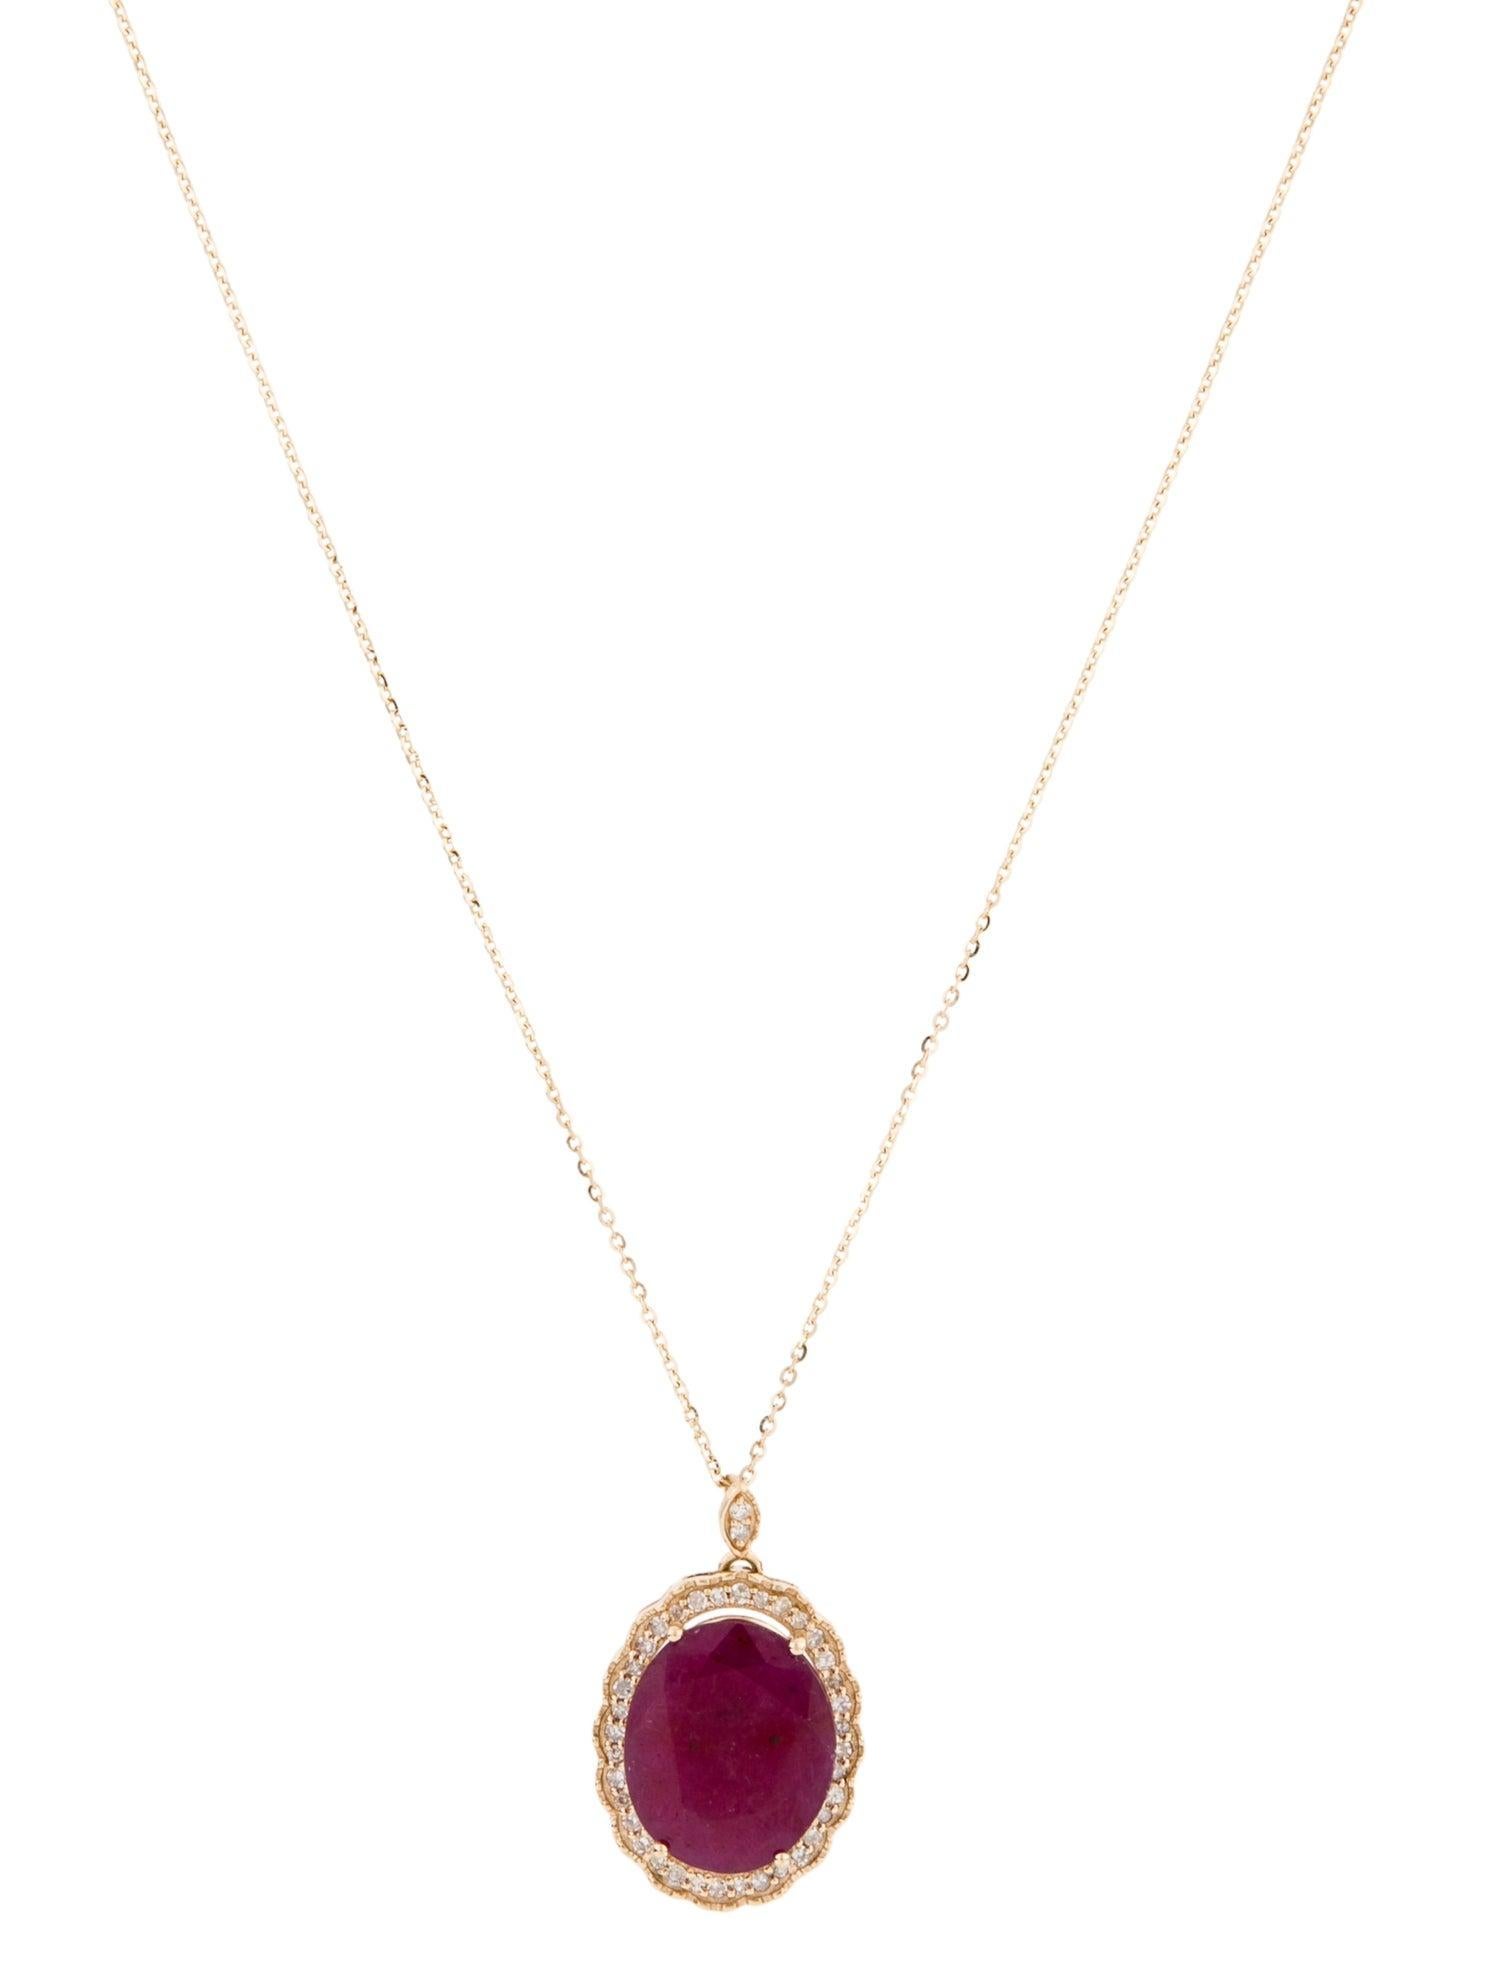 14K 3.79ct Ruby & Diamond Pendant Necklace: Exquisite Luxury Statement Jewelry In New Condition For Sale In Holtsville, NY